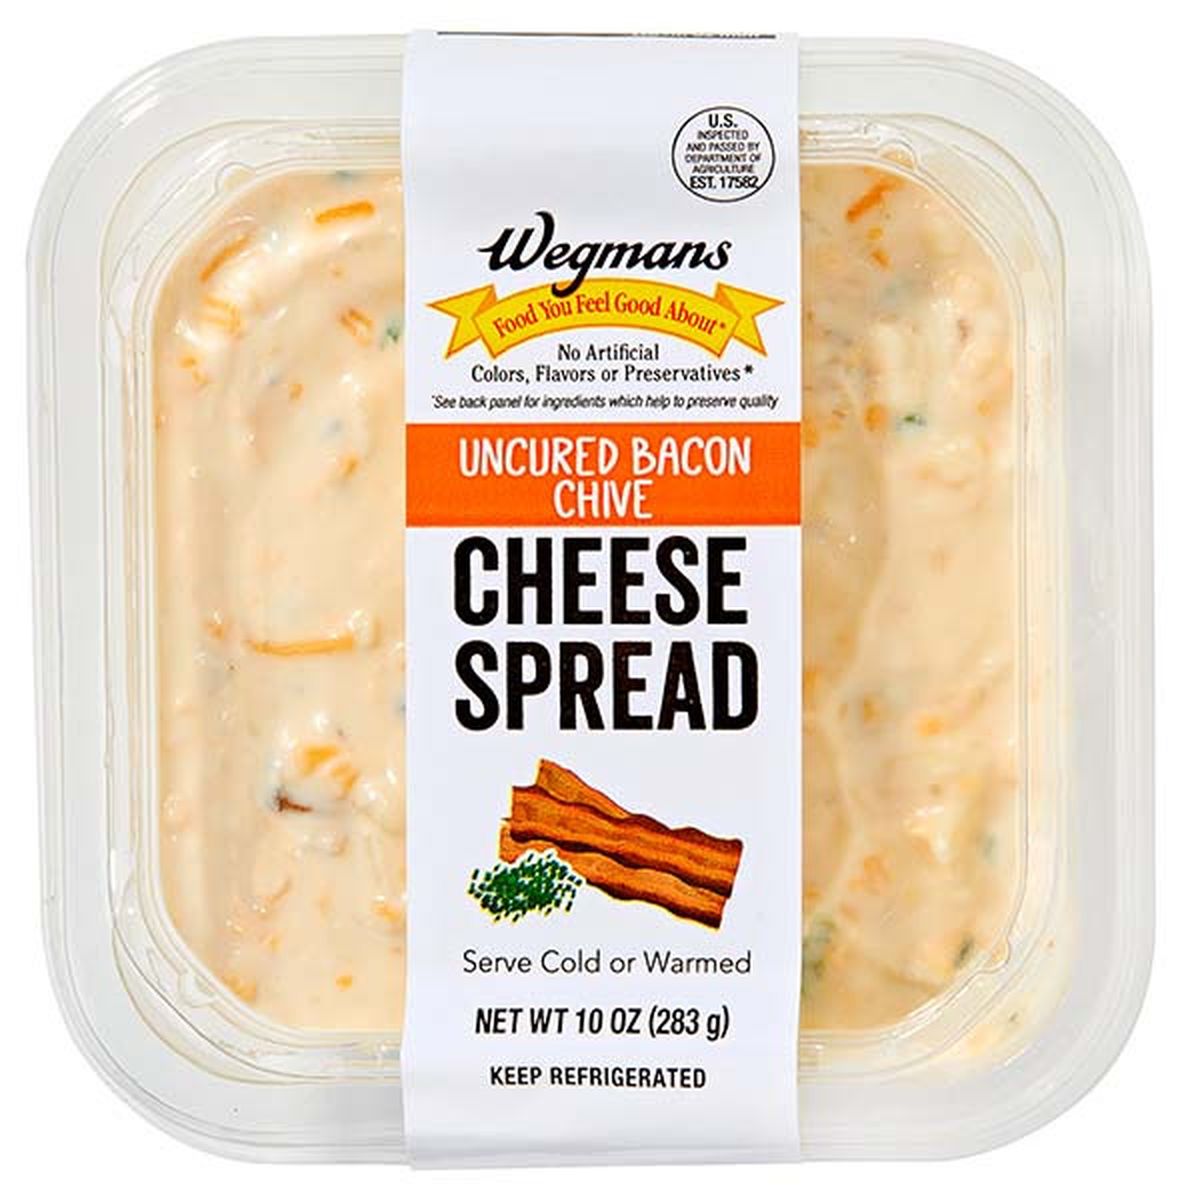 Calories in Wegmans Uncured Bacon Chive Cheese Spread